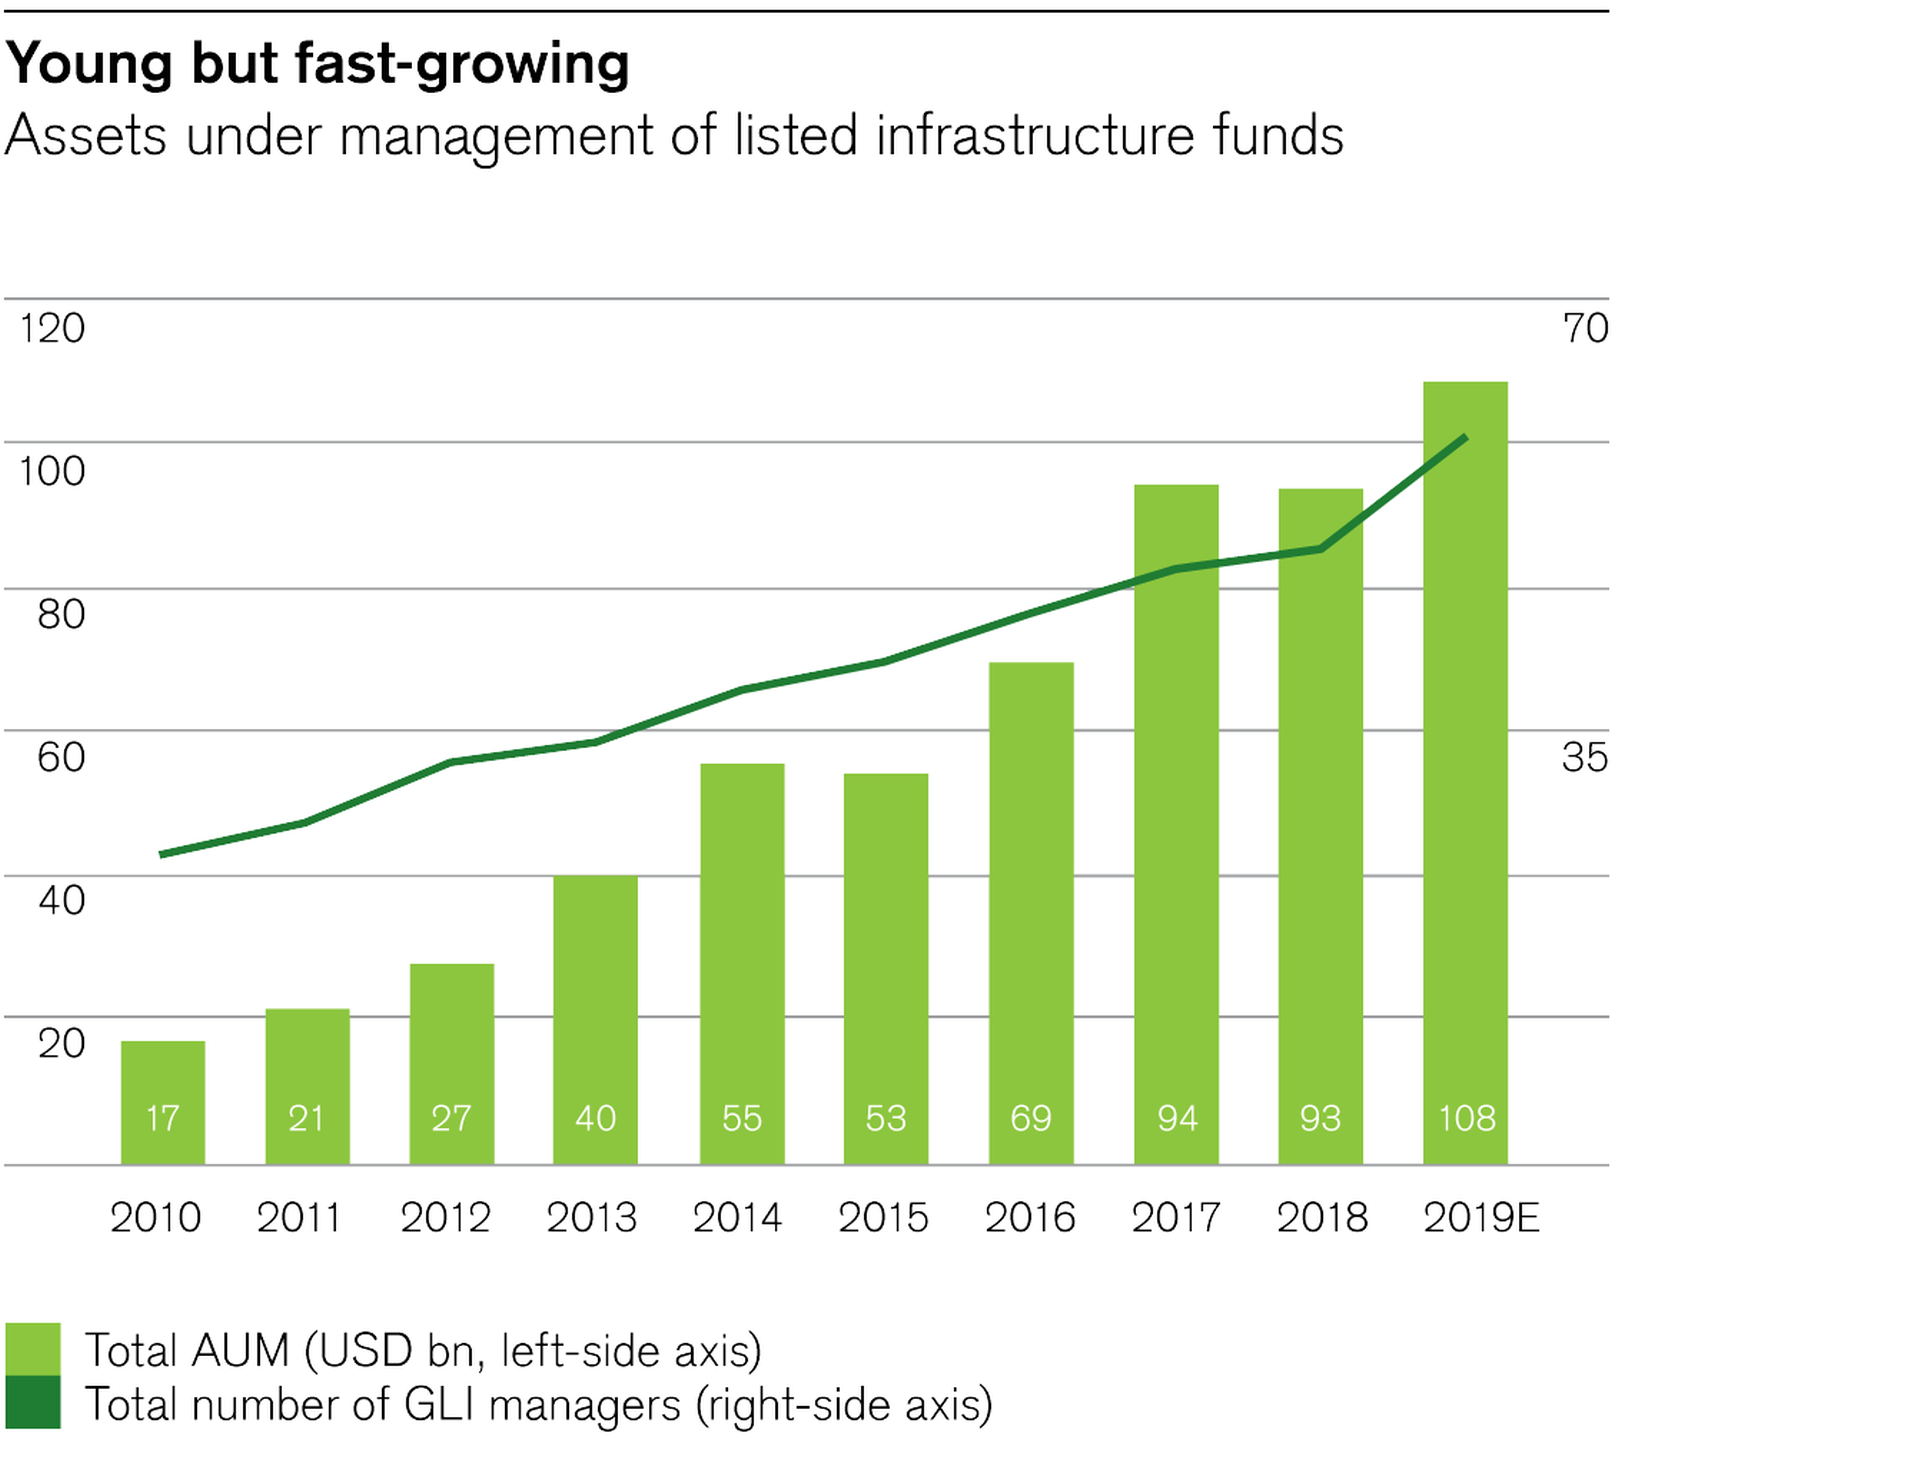 Assets under management of listed infrastructure funds